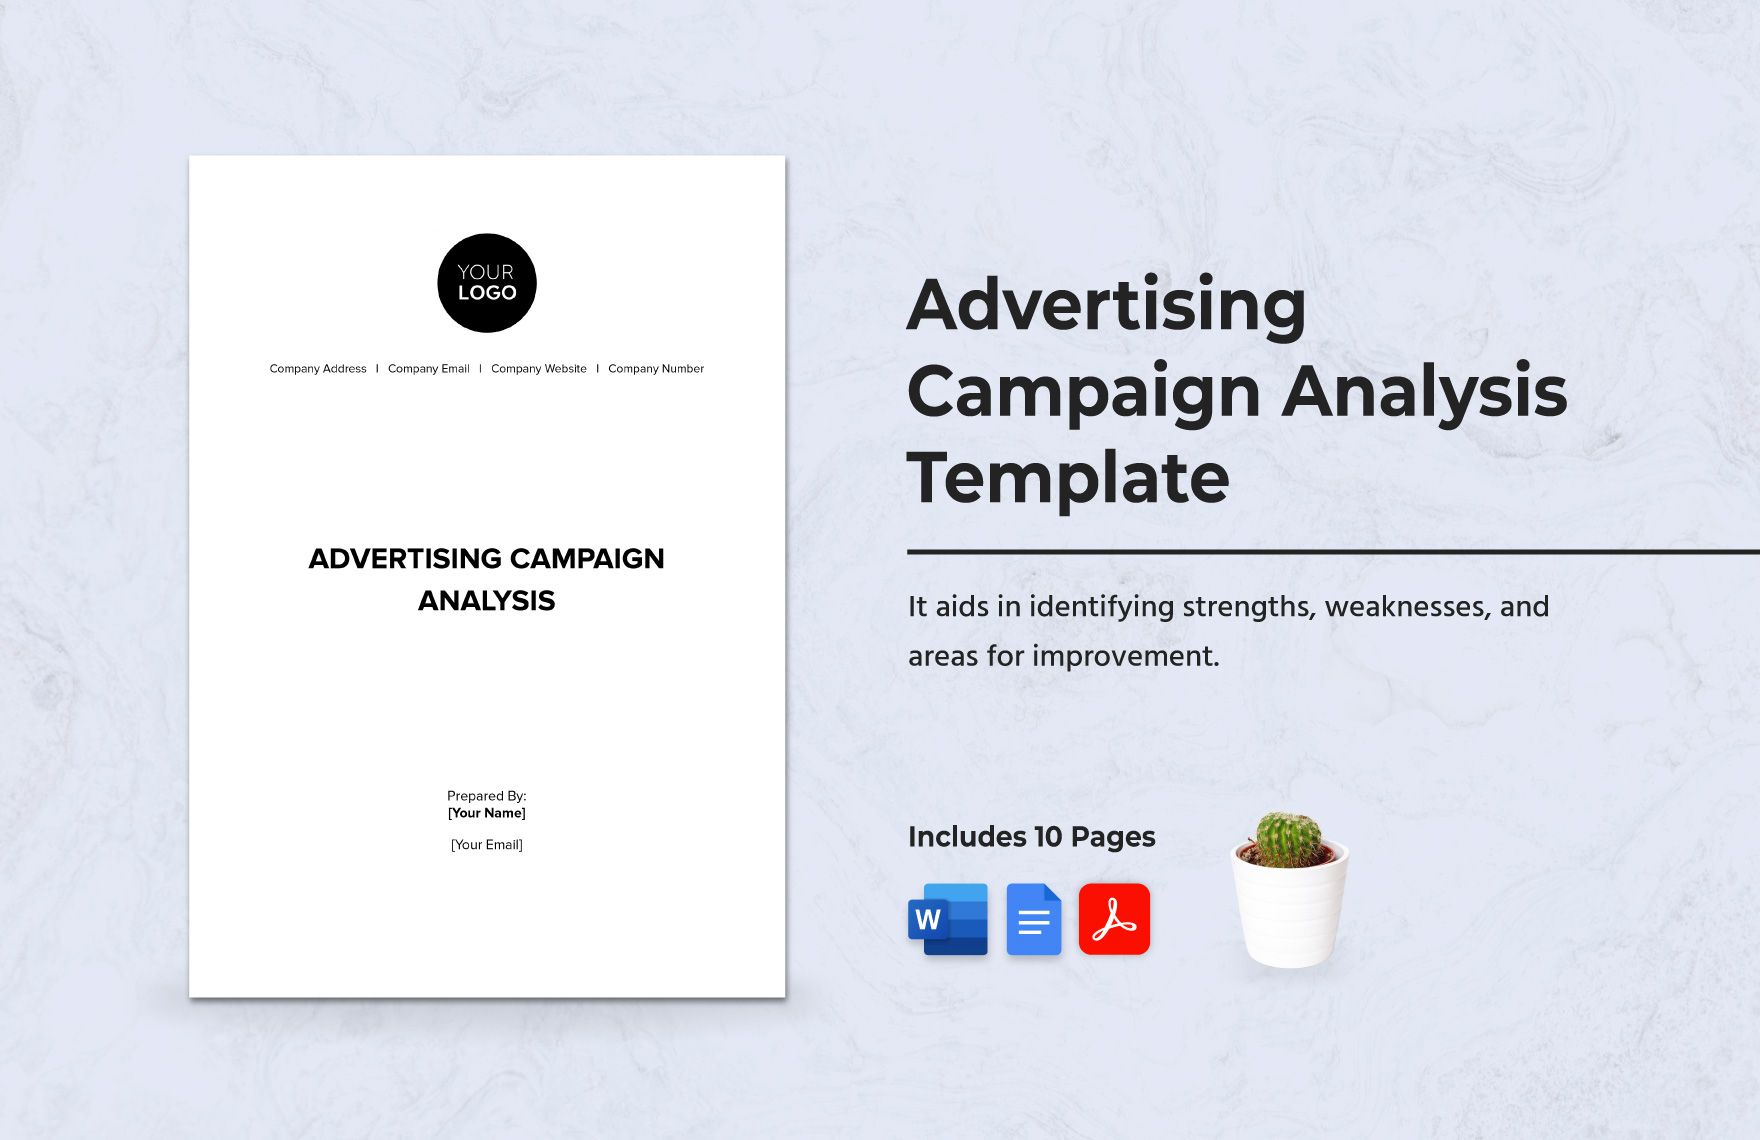 Advertising Campaign Analysis  Template in Word, Google Docs, PDF